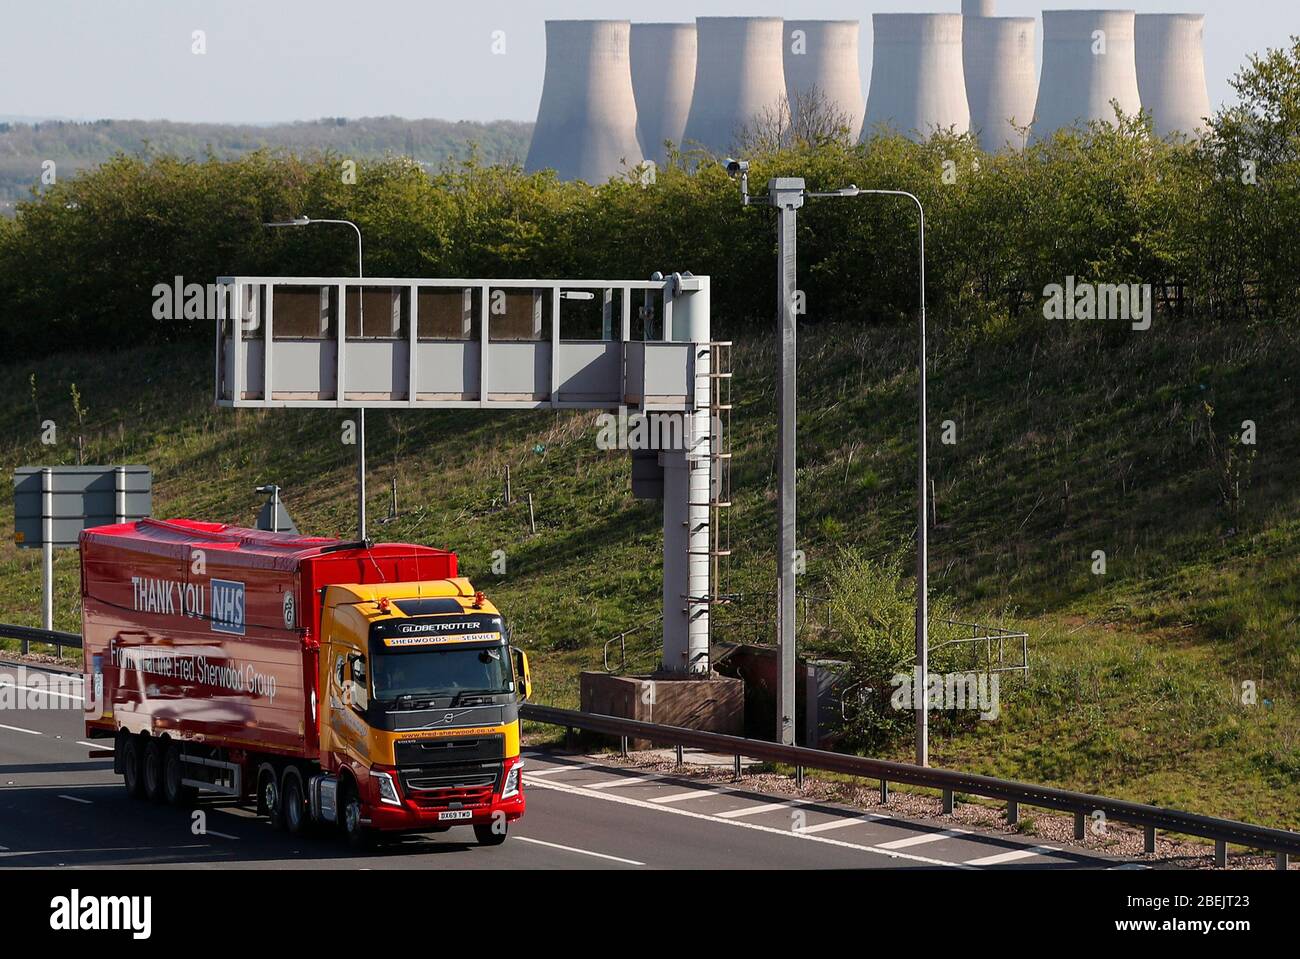 Kegworth, Leicestershire, UK. 14th April 2020.  A Fred Sherwood Group lorry sign written with a thank you message to the NHS is driven on the M1 motorway near Kegworth during the Coronavirus pandemic lockdown. Credit Darren Staples/Alamy Live News. Stock Photo